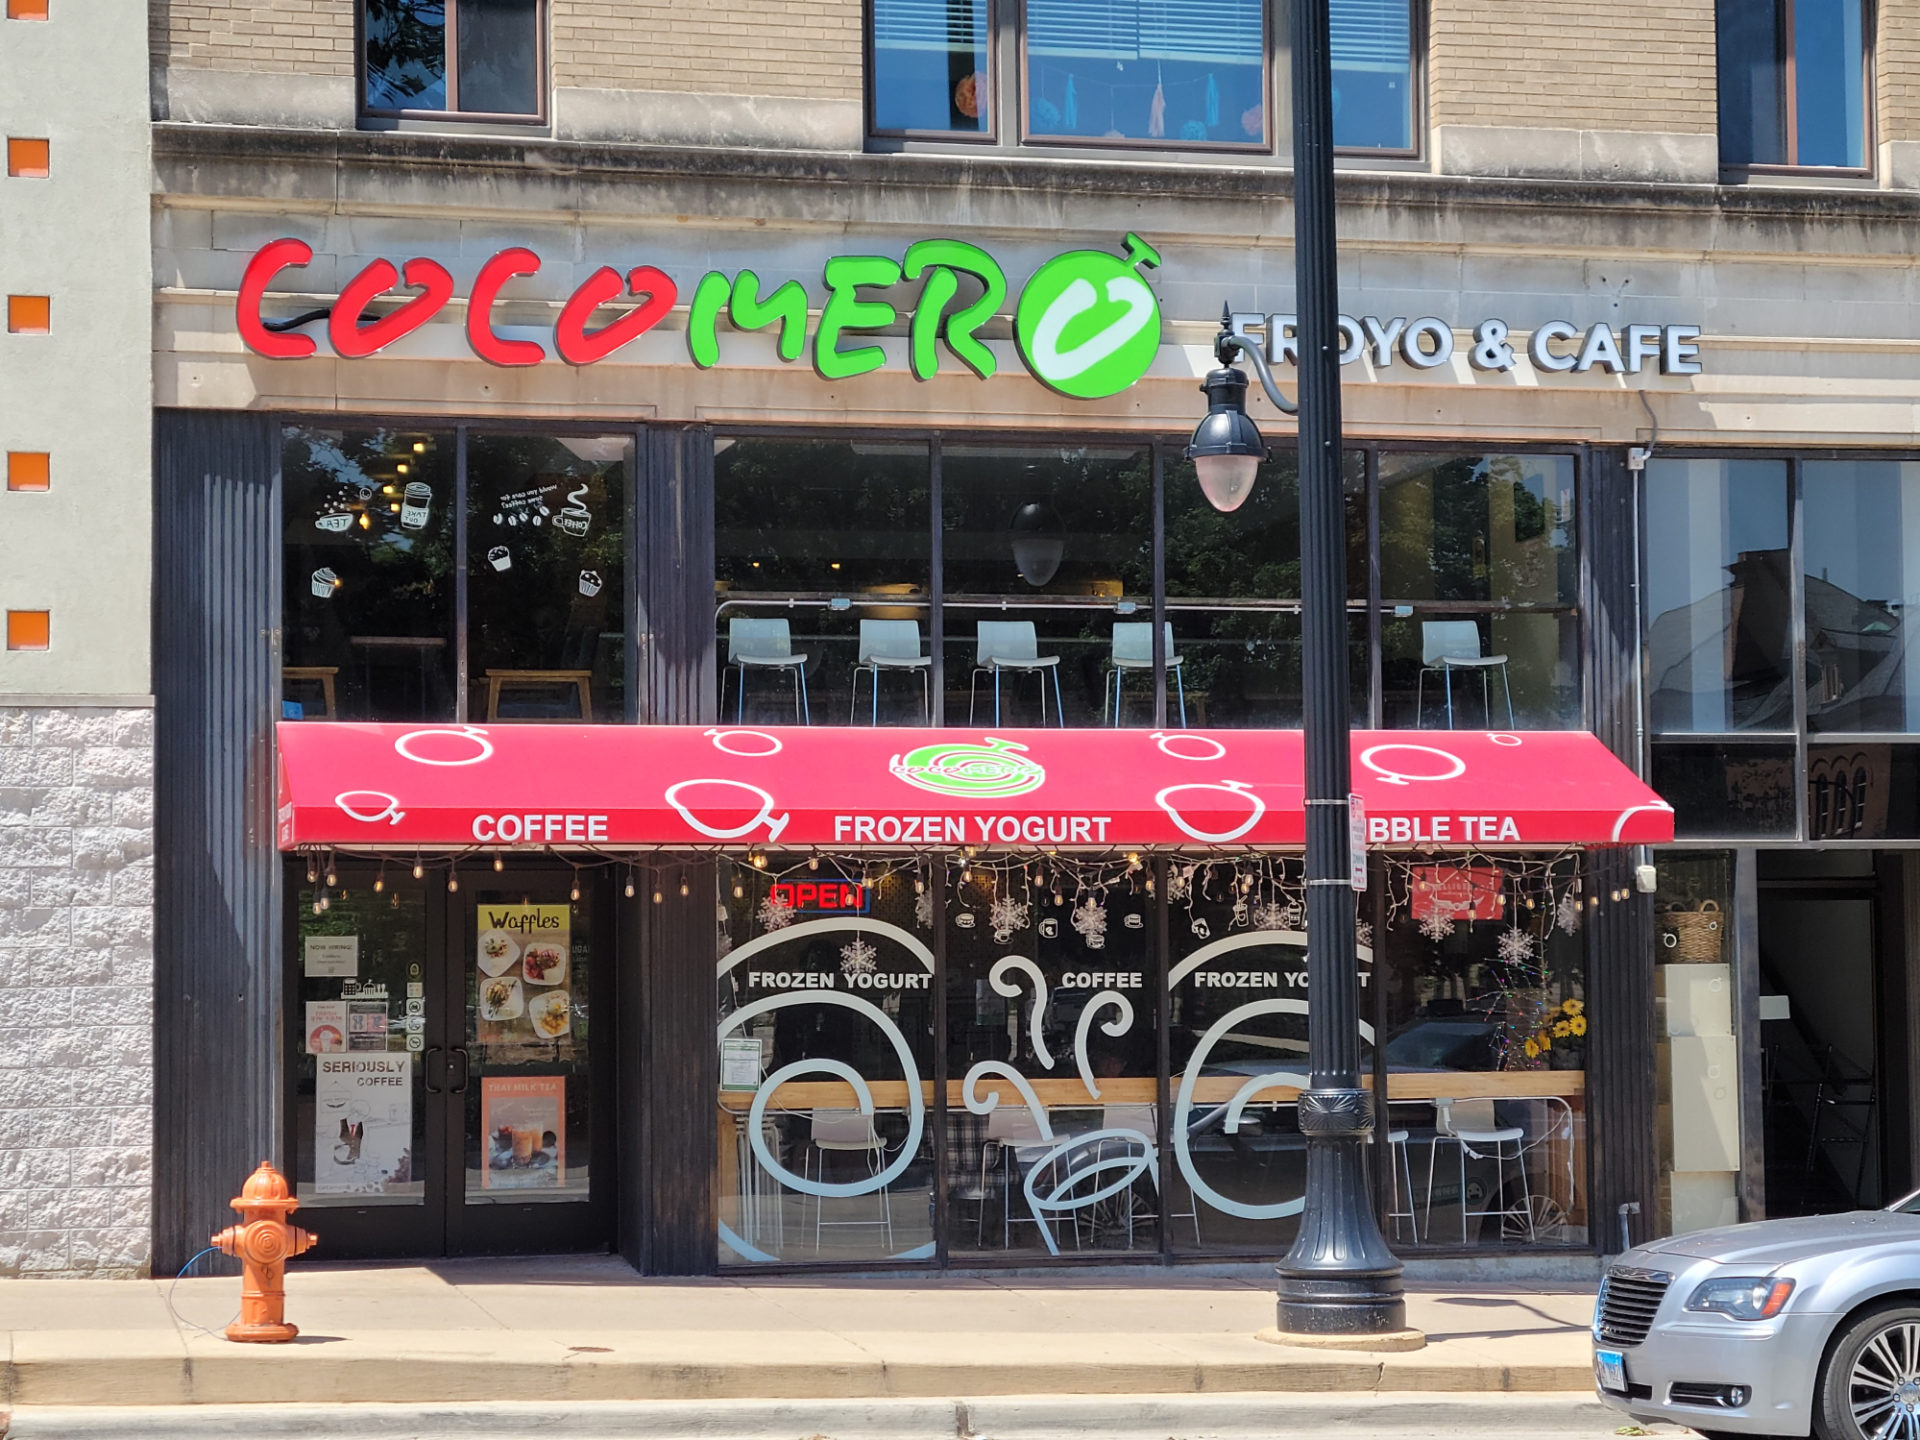 The exterior of Cocomero with two pulling glass doors. Photo by Matthew Macomber